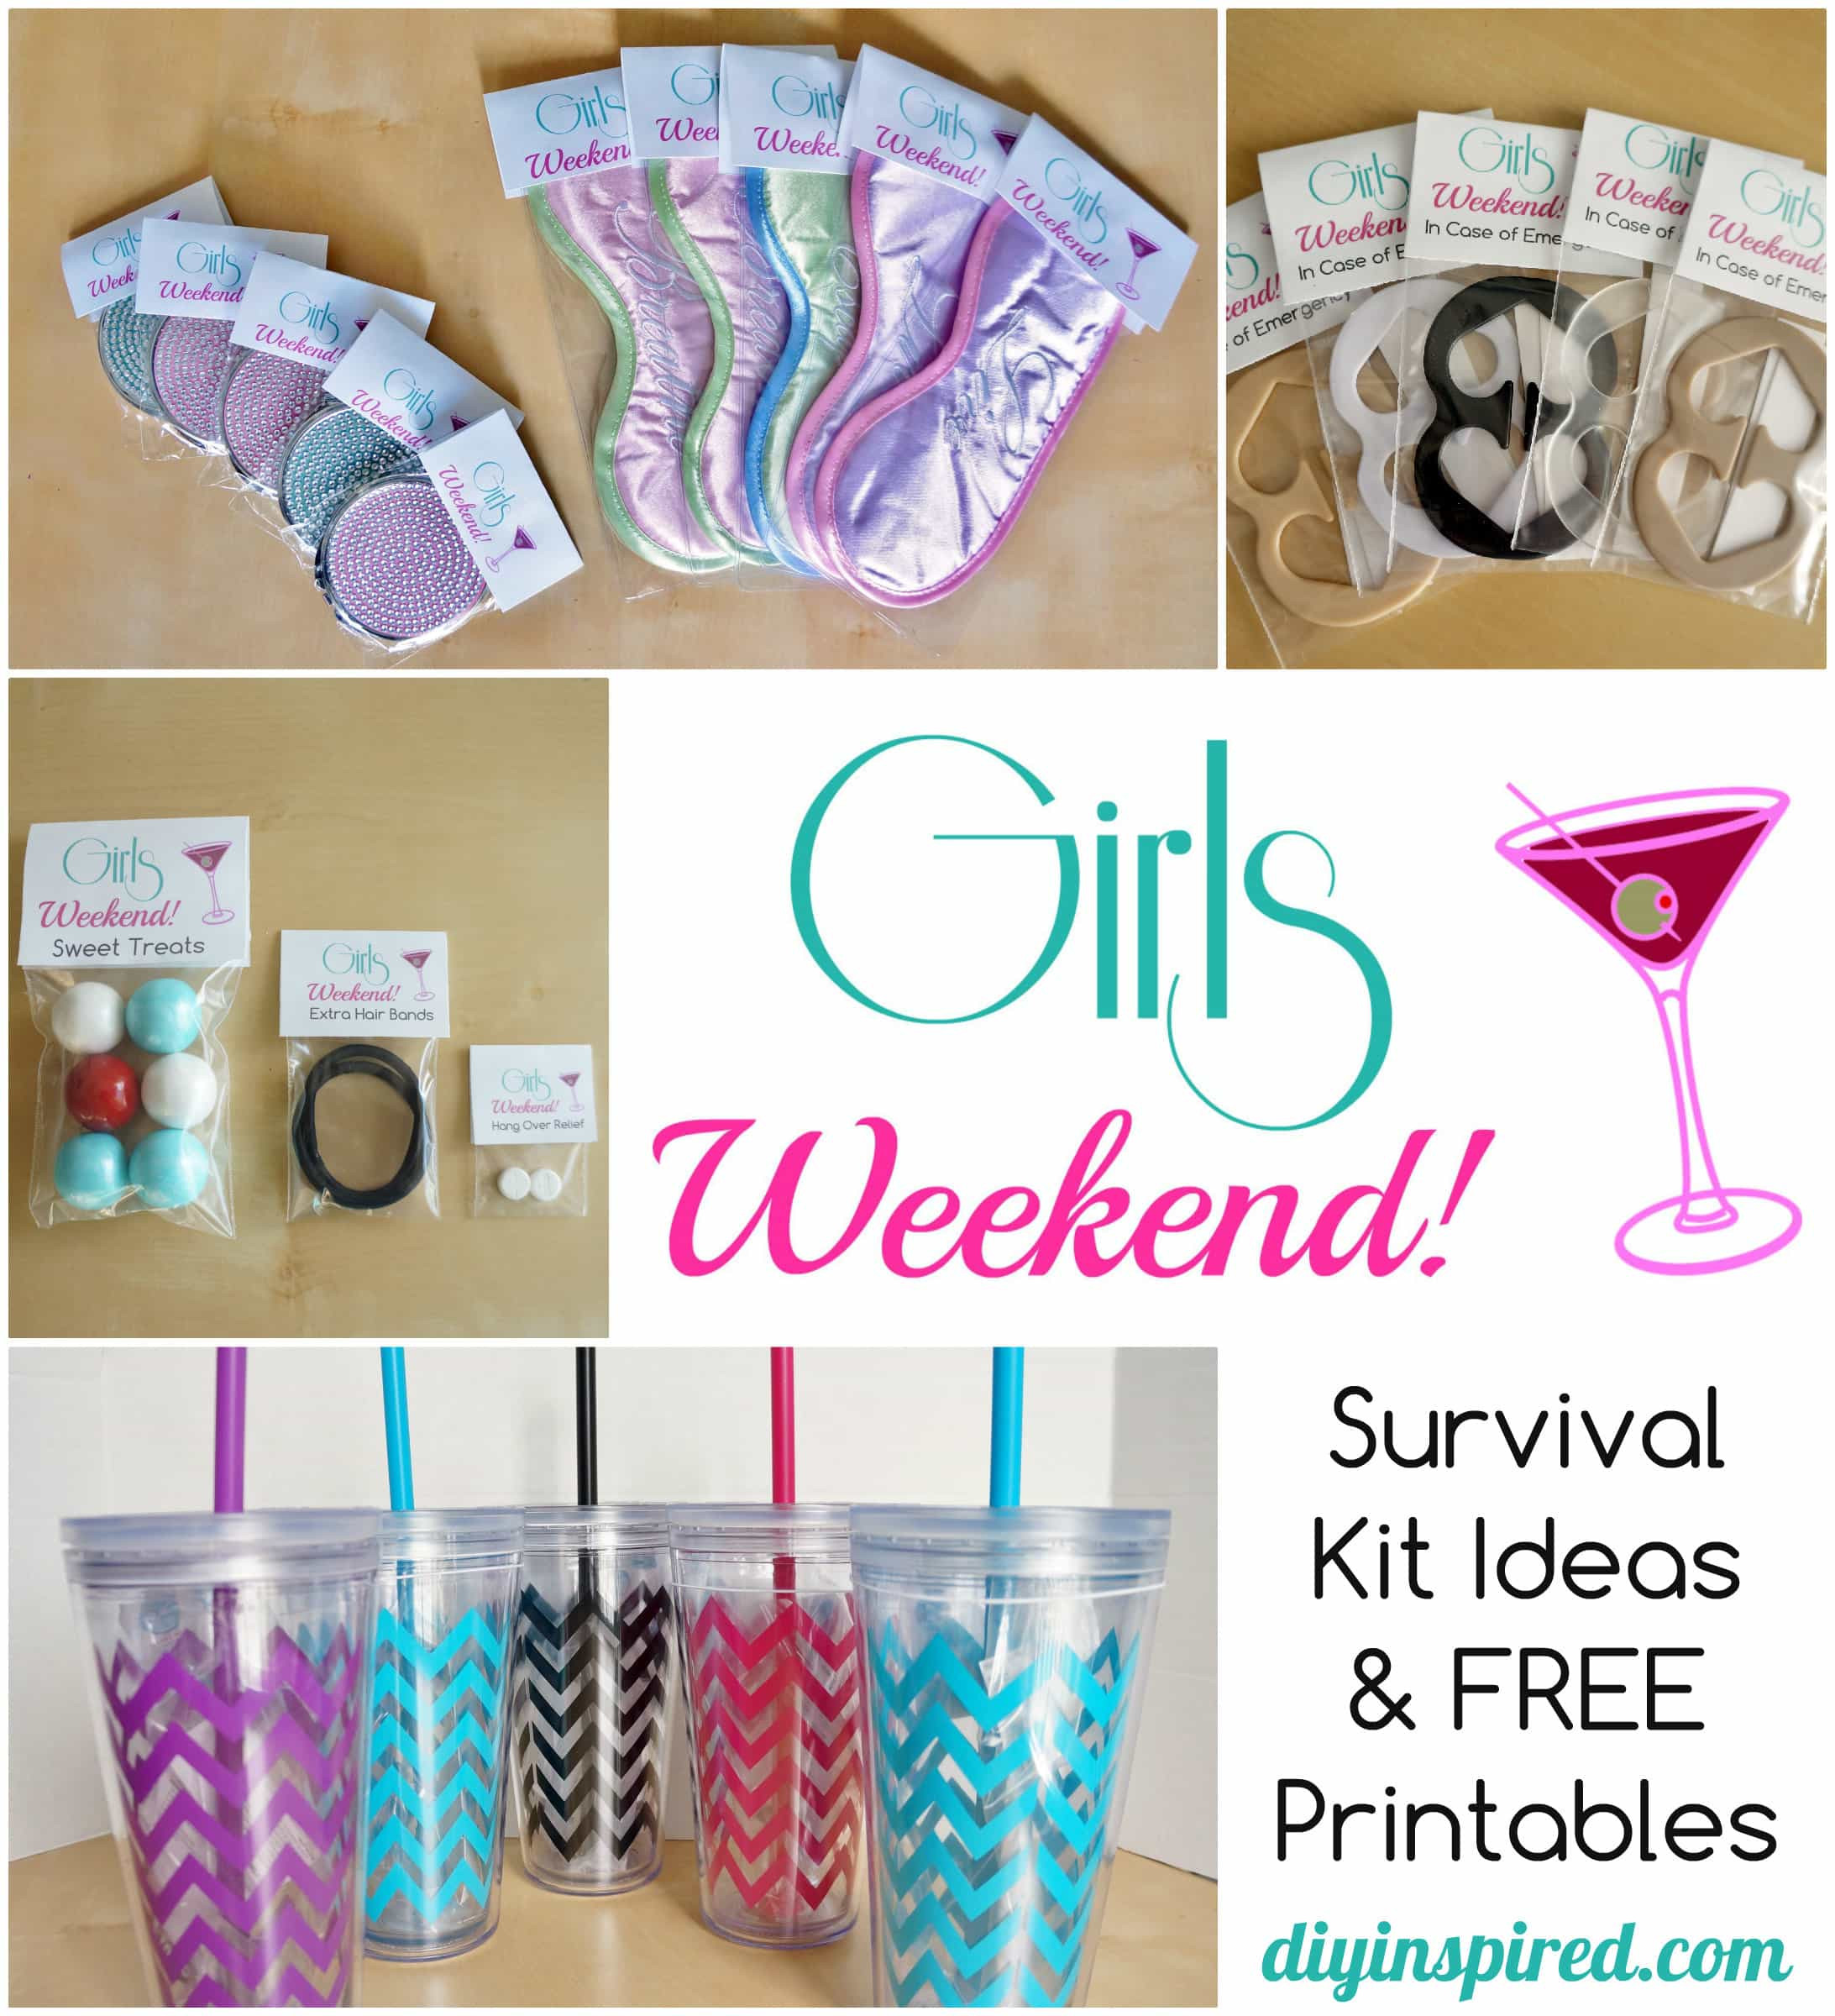 Gift Ideas For Girls Weekend
 DIY Bachelorette Party Favor Ideas FREE Printable DIY